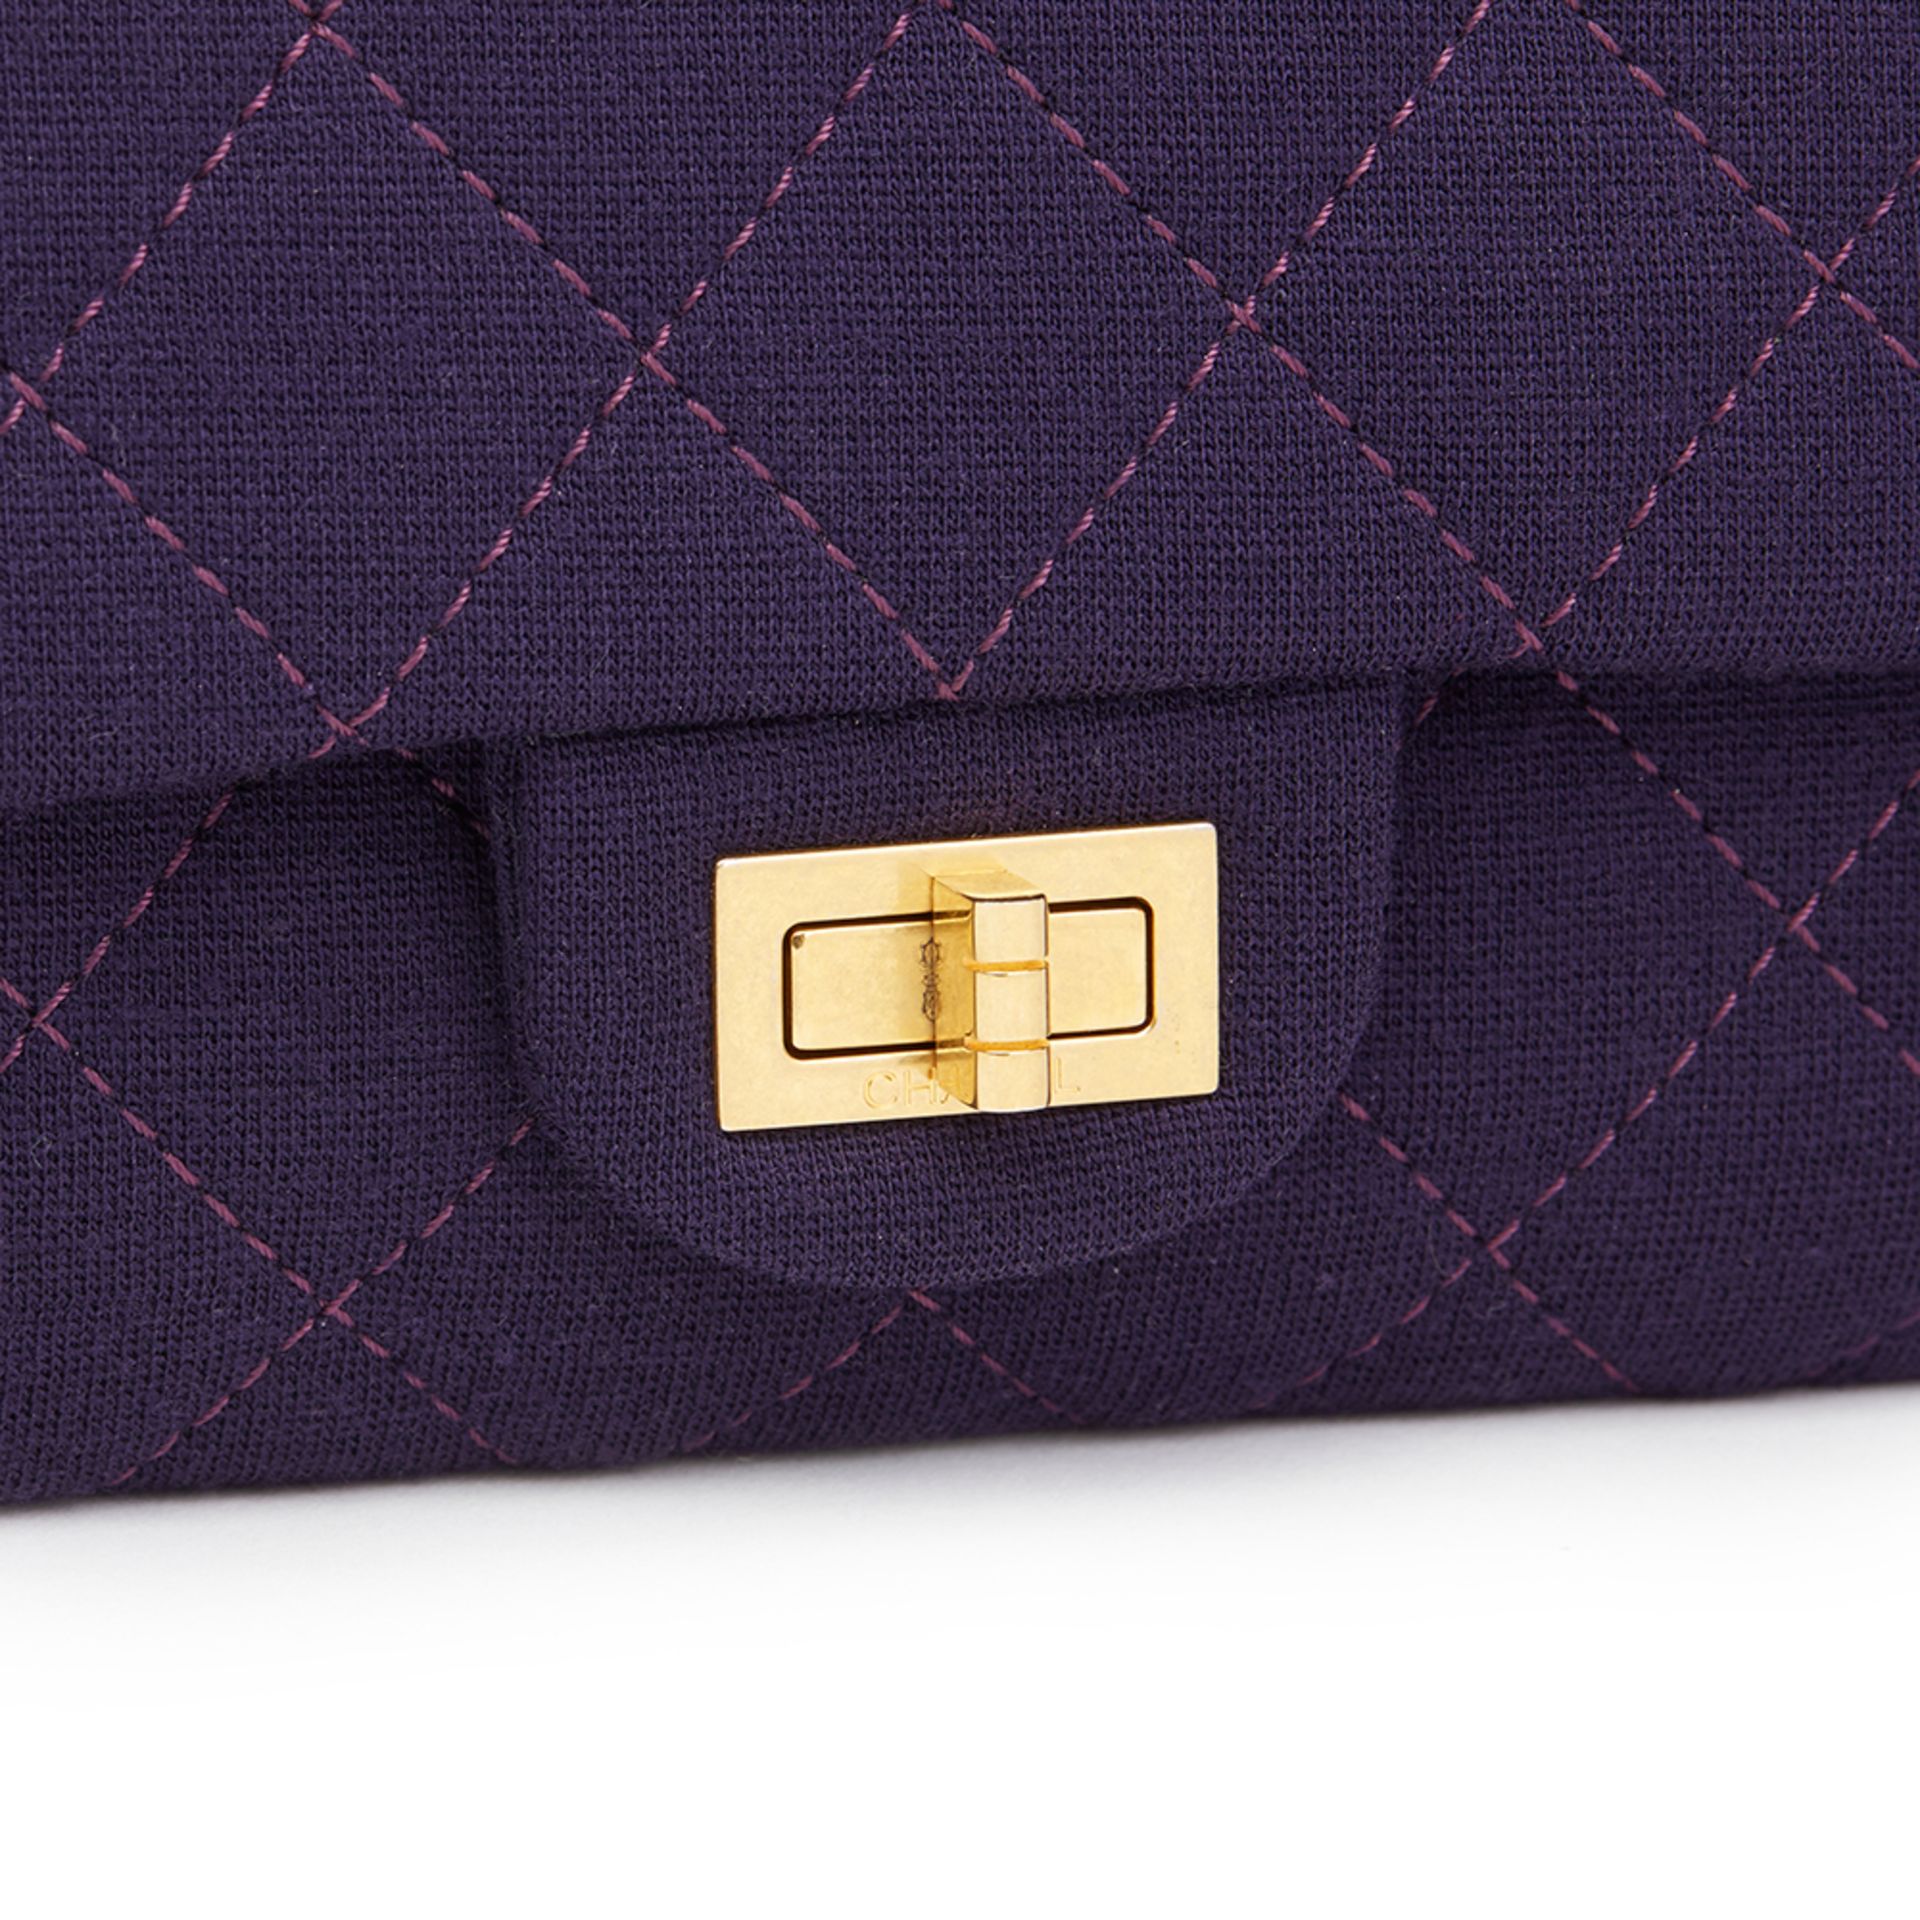 Violet Quilted Jersey Fabric 2.55 Reissue 226 Double Flap Bag - Image 6 of 10